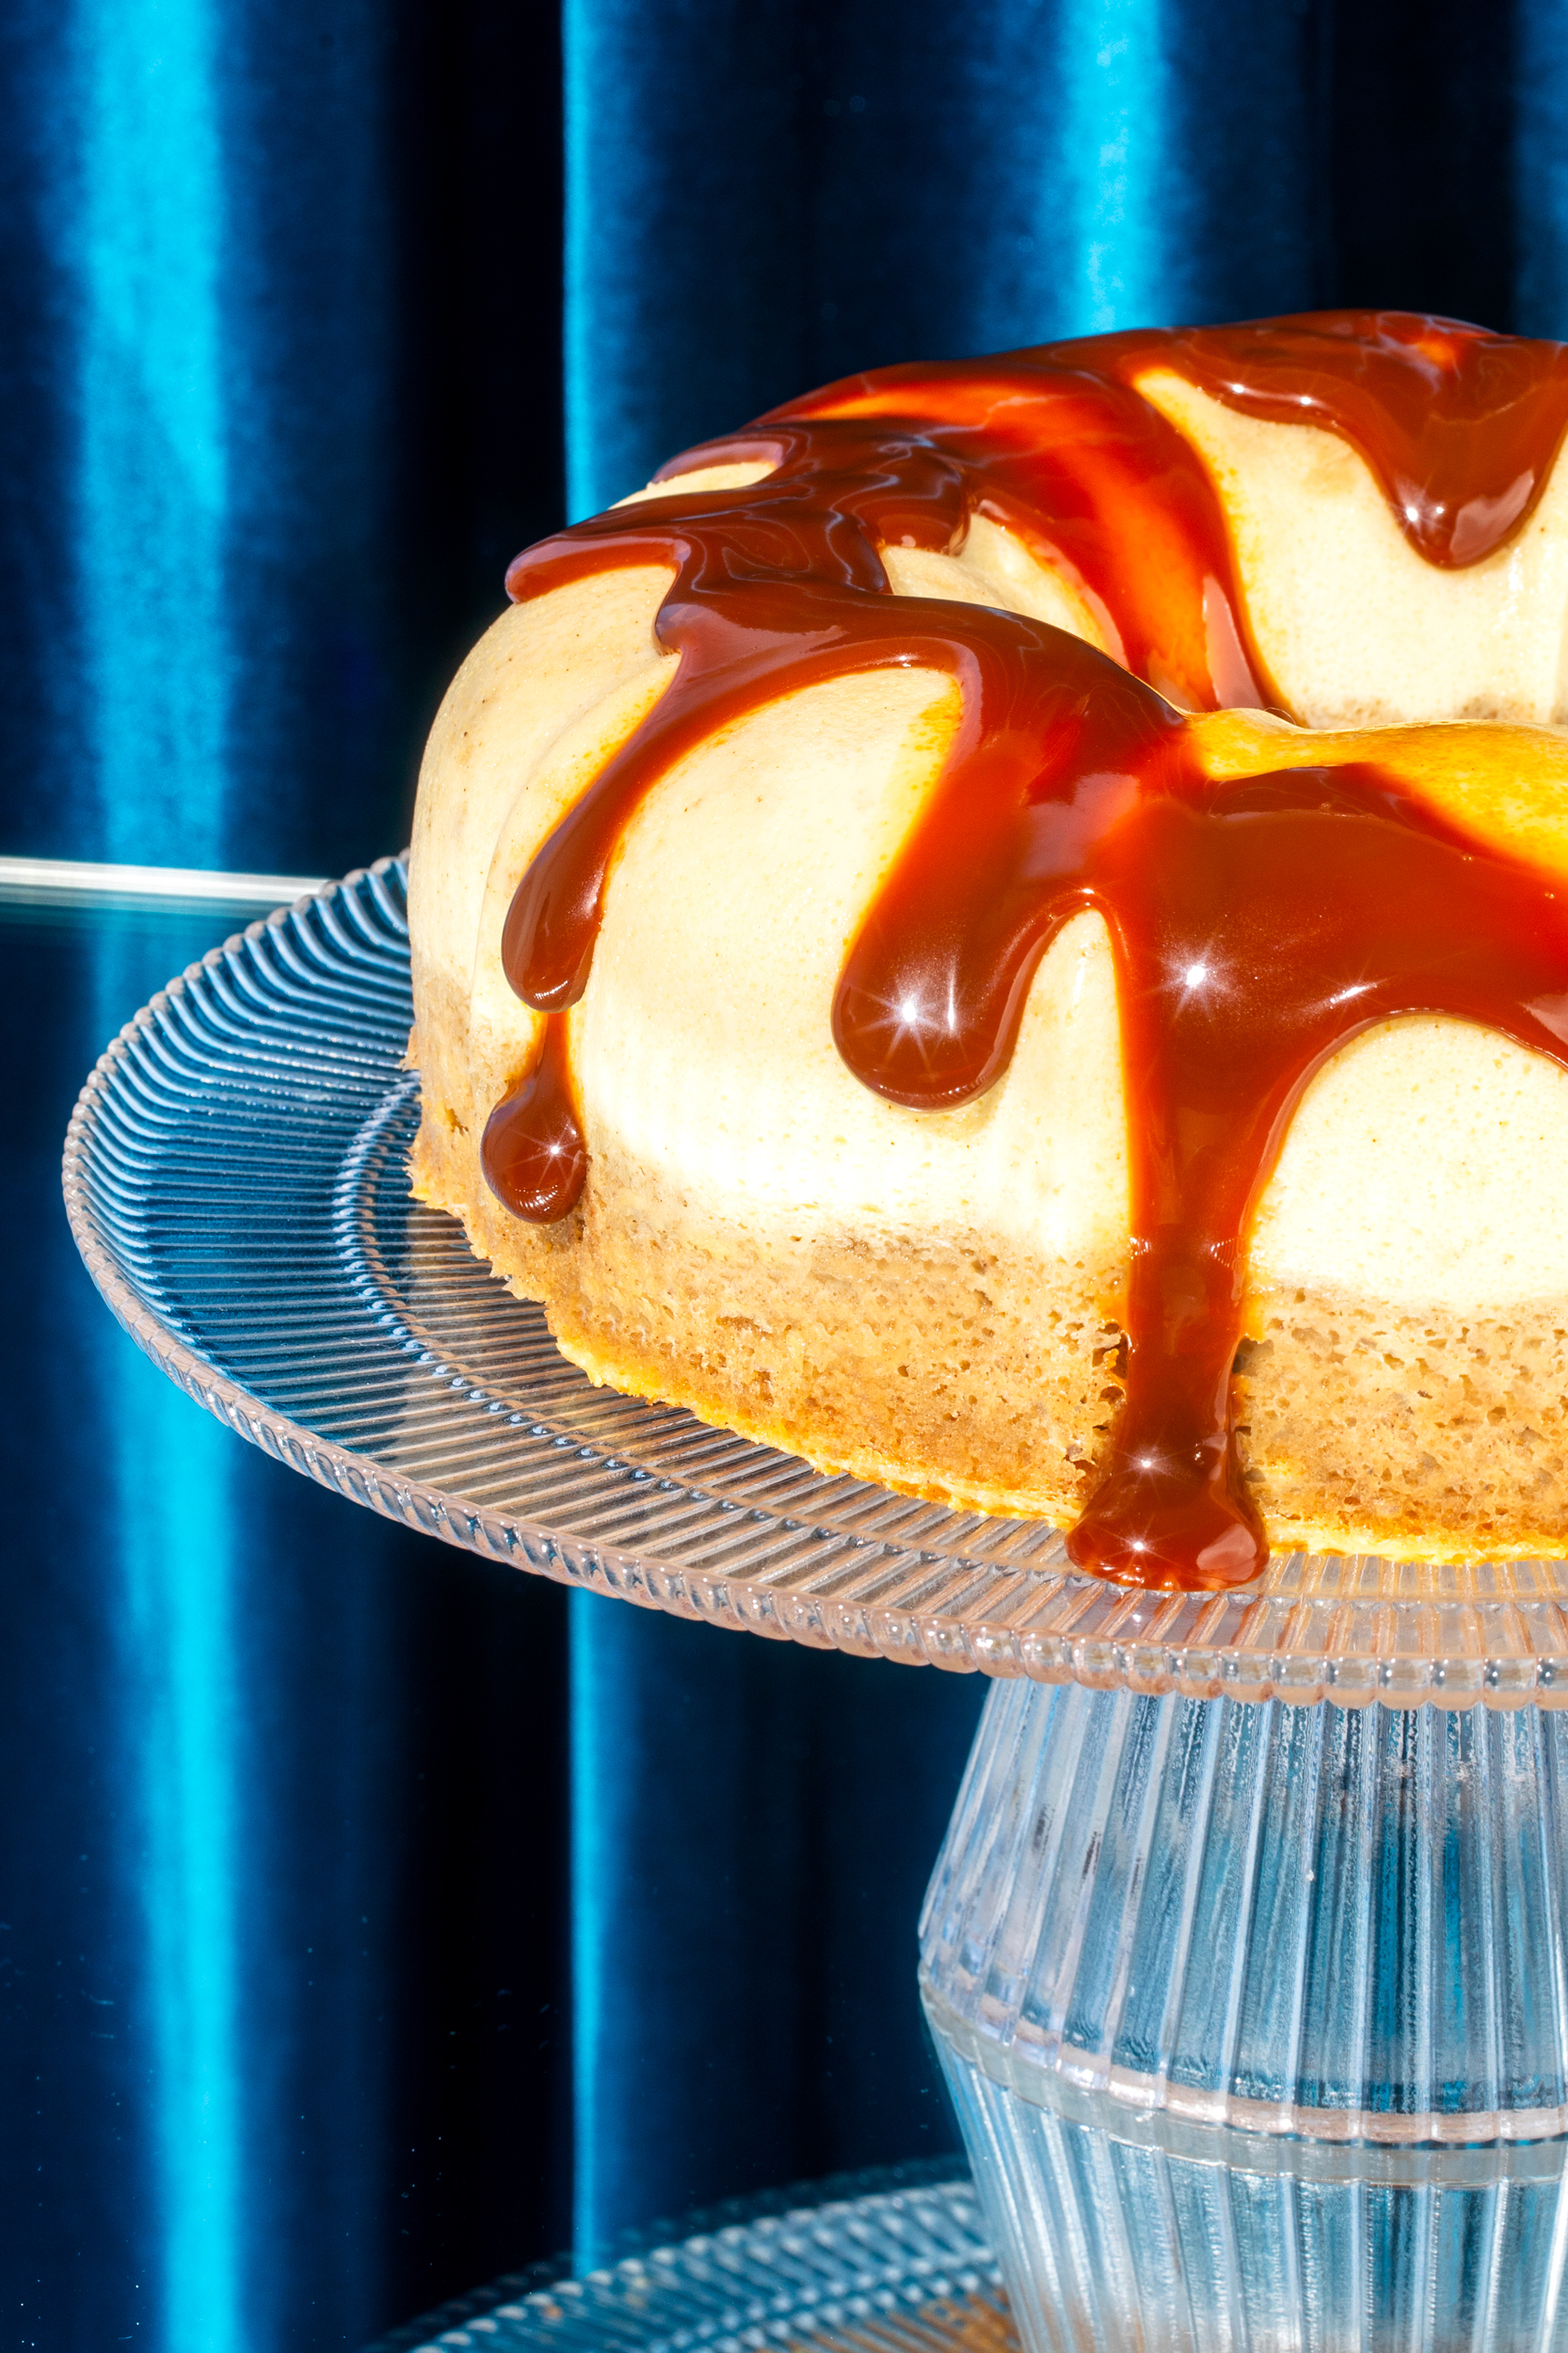 Magic Chocolate Flan Cake - Project Pastry Love